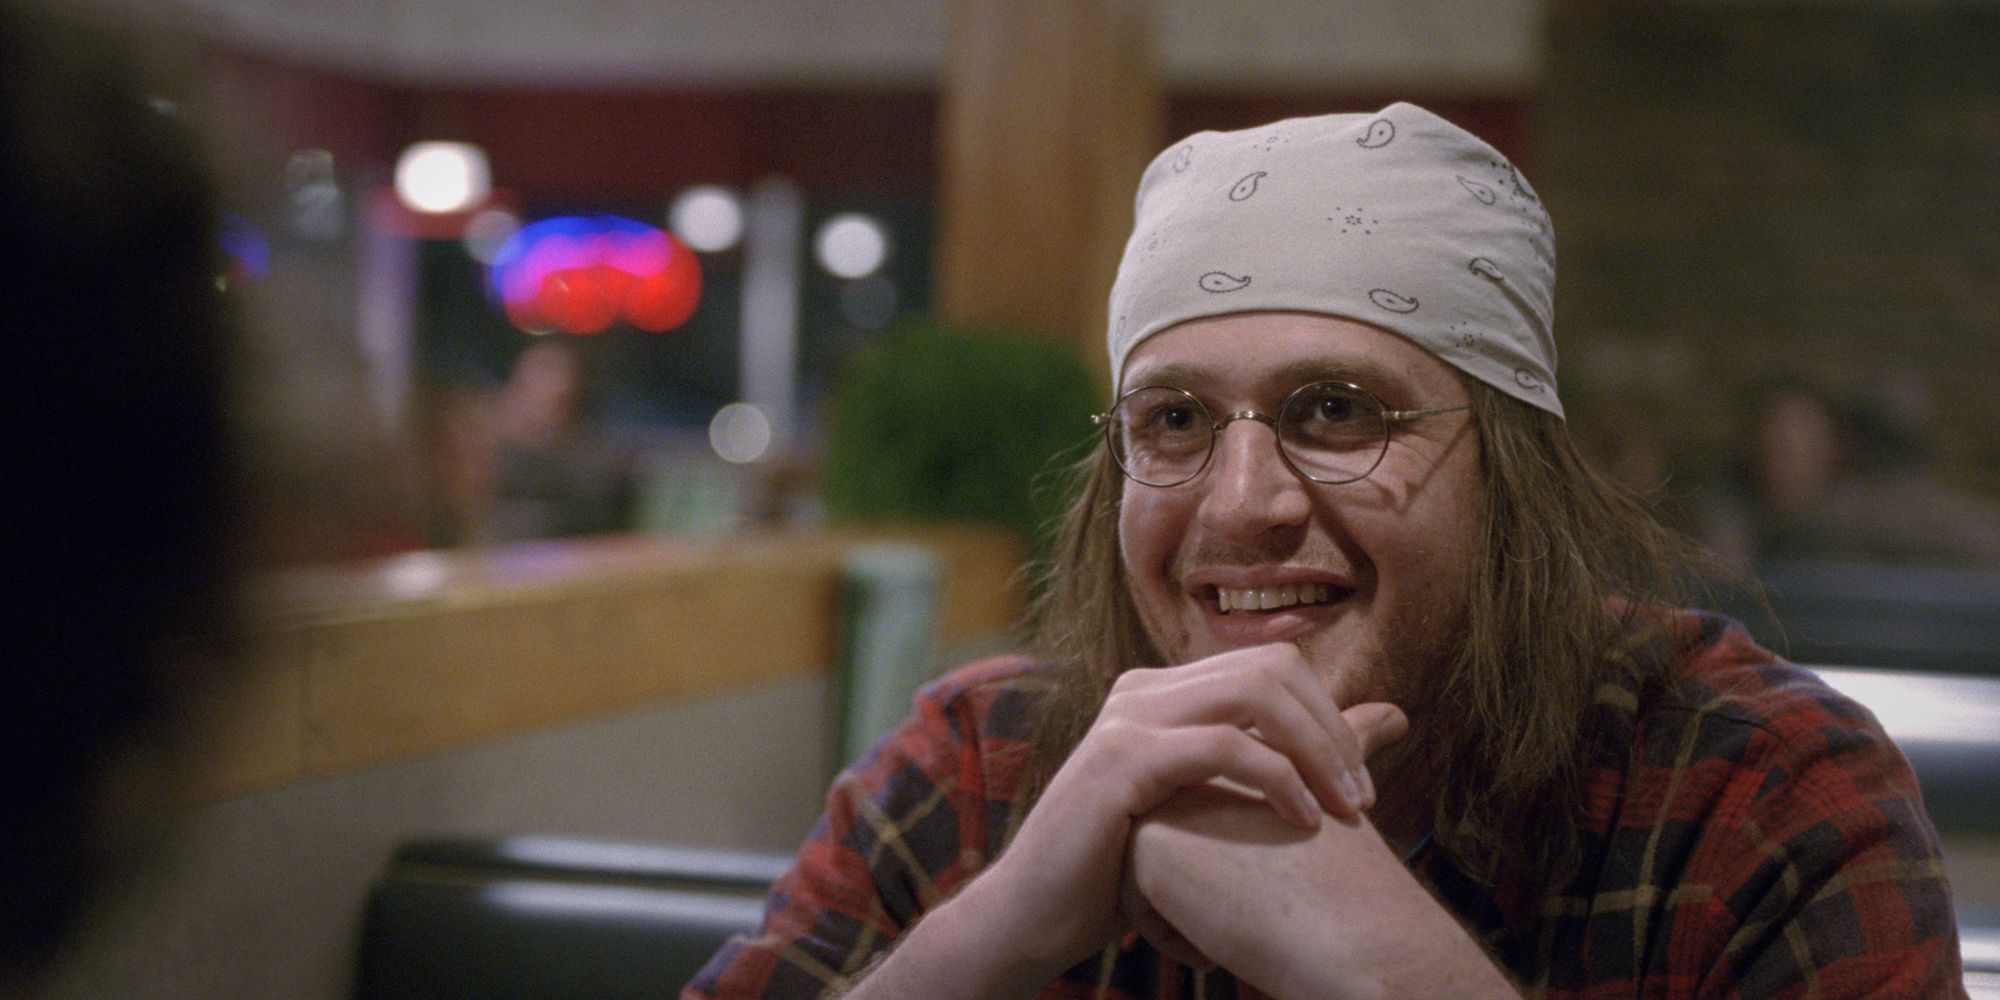 Jason Segel as David Foster smiling at someone off-camera in the film The End of the Tour